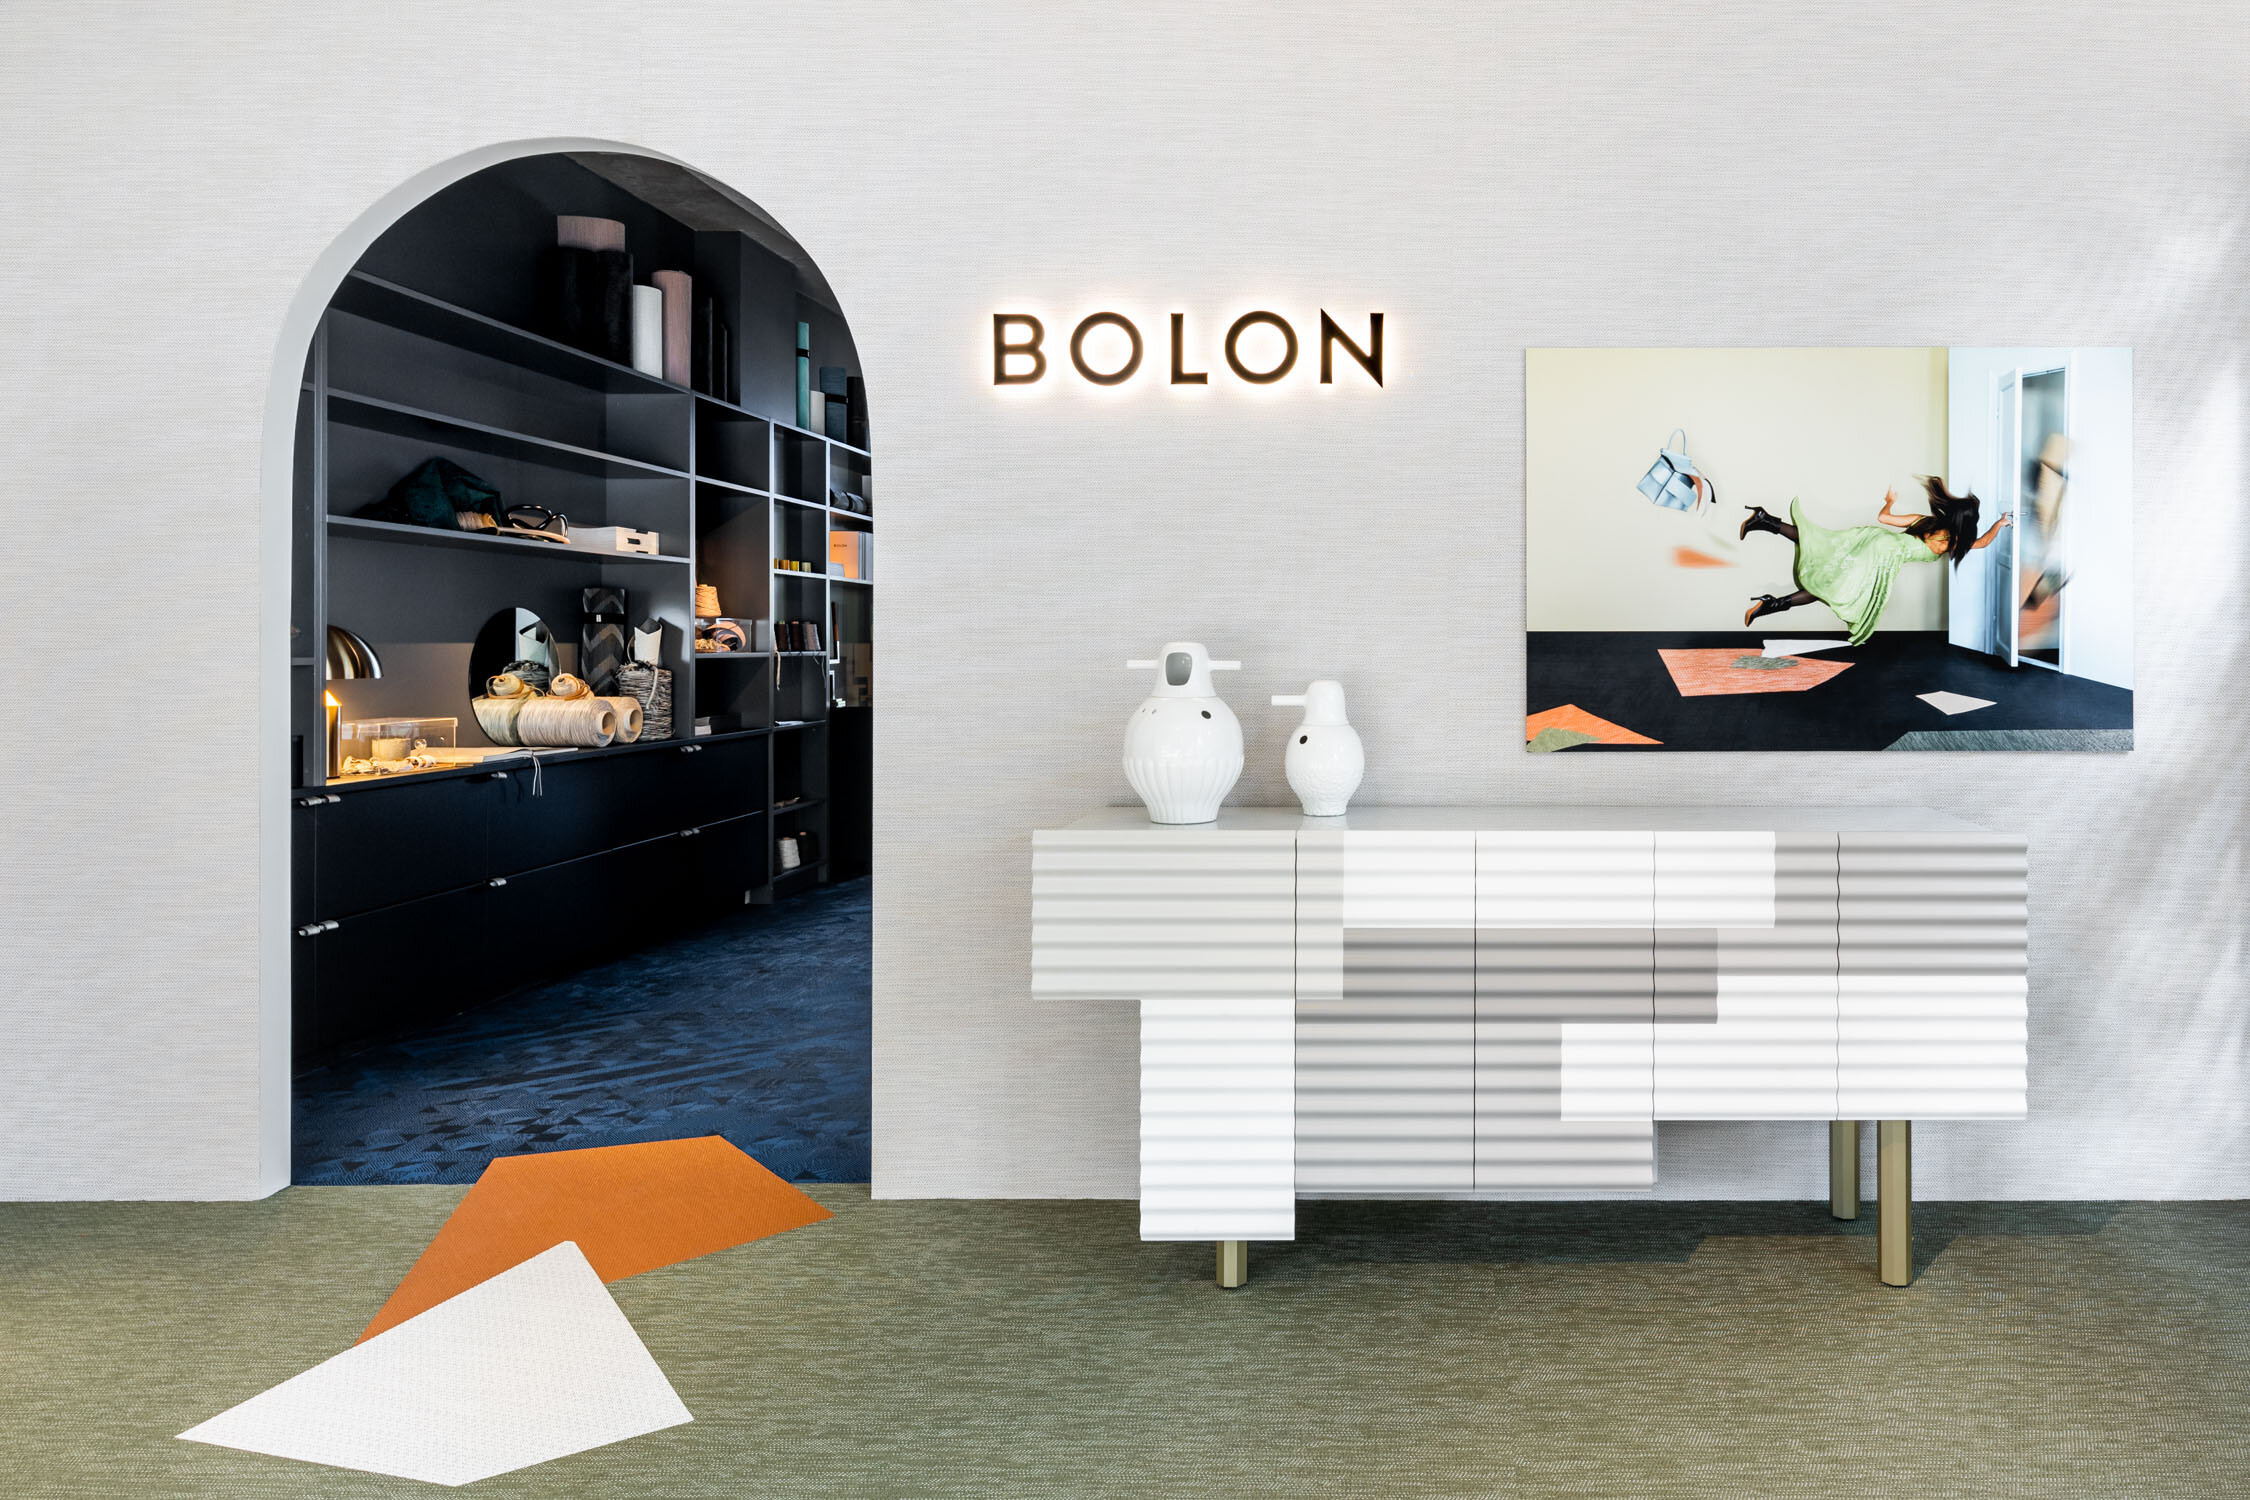 Retail Architectural Photography Sydney - Bolon Showroom